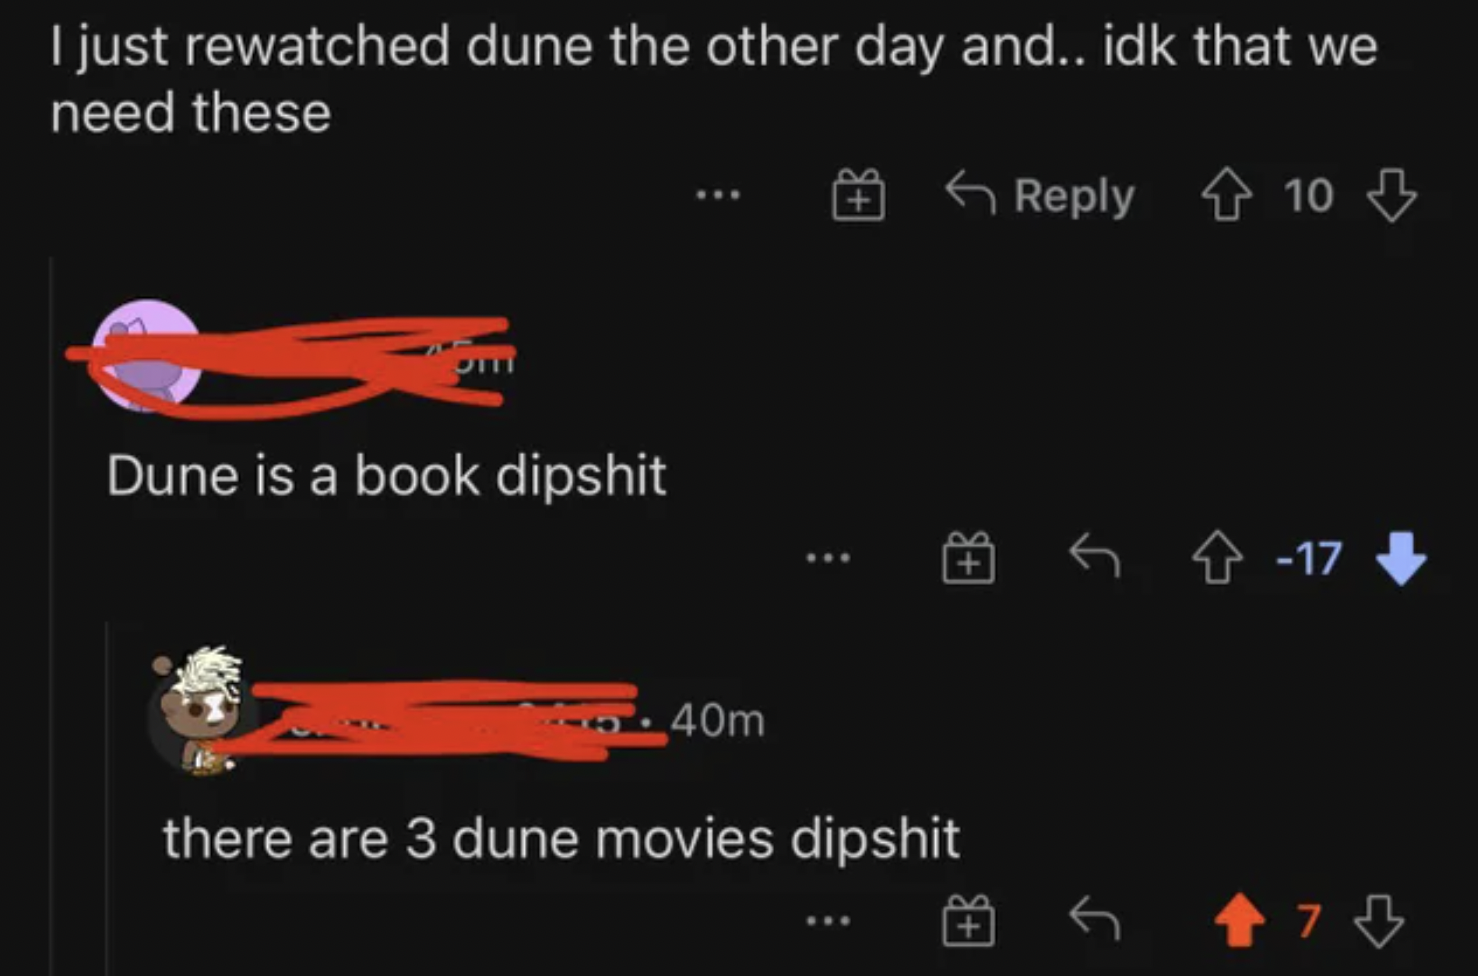 orange - I just rewatched dune the other day and.. idk that we need these Dune is a book